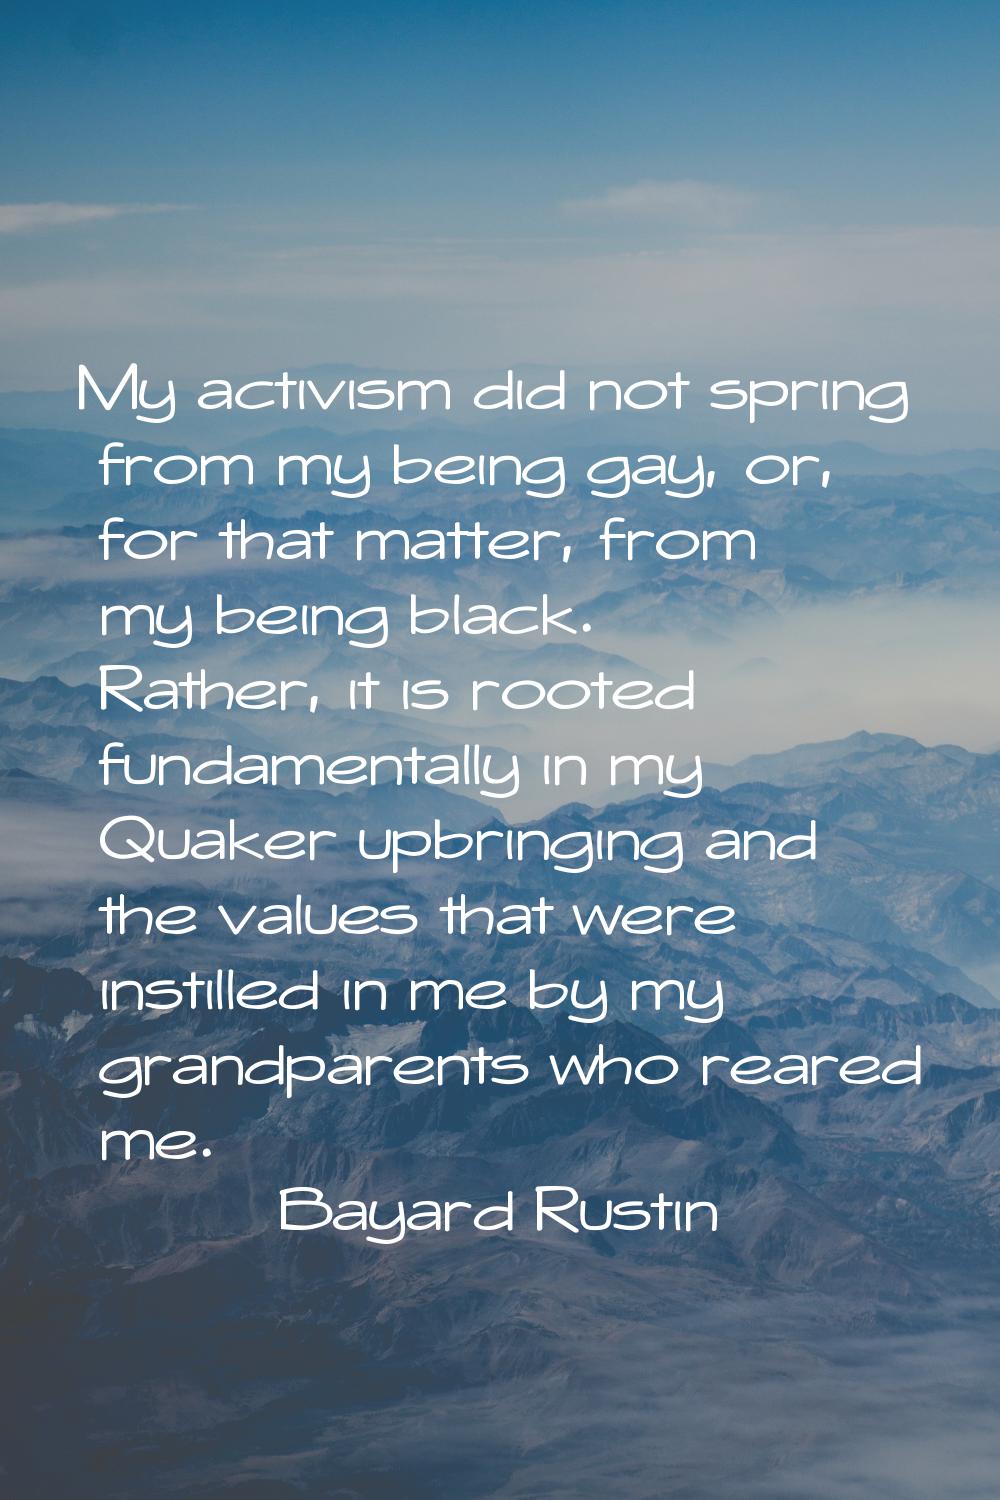 My activism did not spring from my being gay, or, for that matter, from my being black. Rather, it 